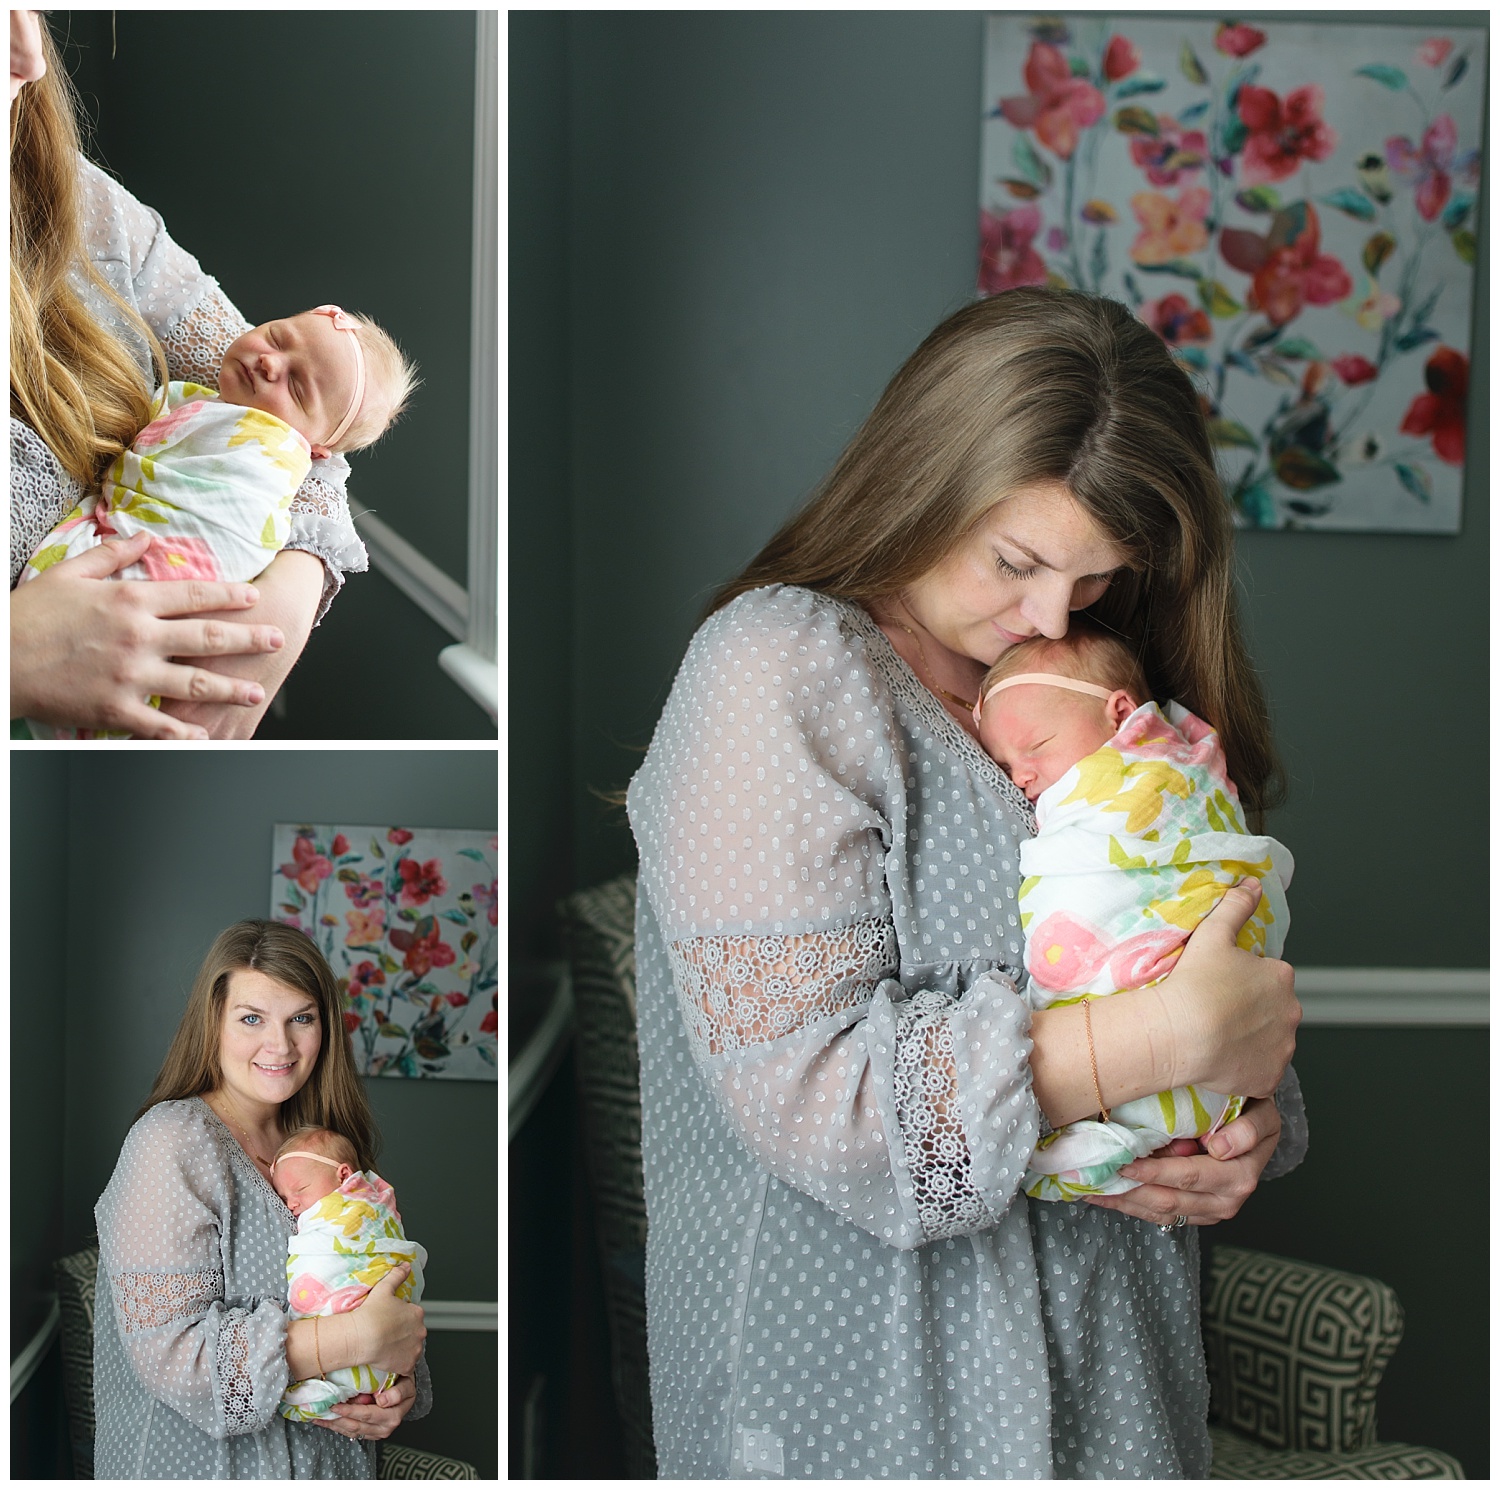 these are images taken during an in home lifestyle newborn family session. mom is holding the newborn baby girl against her chest and standing next to the window.